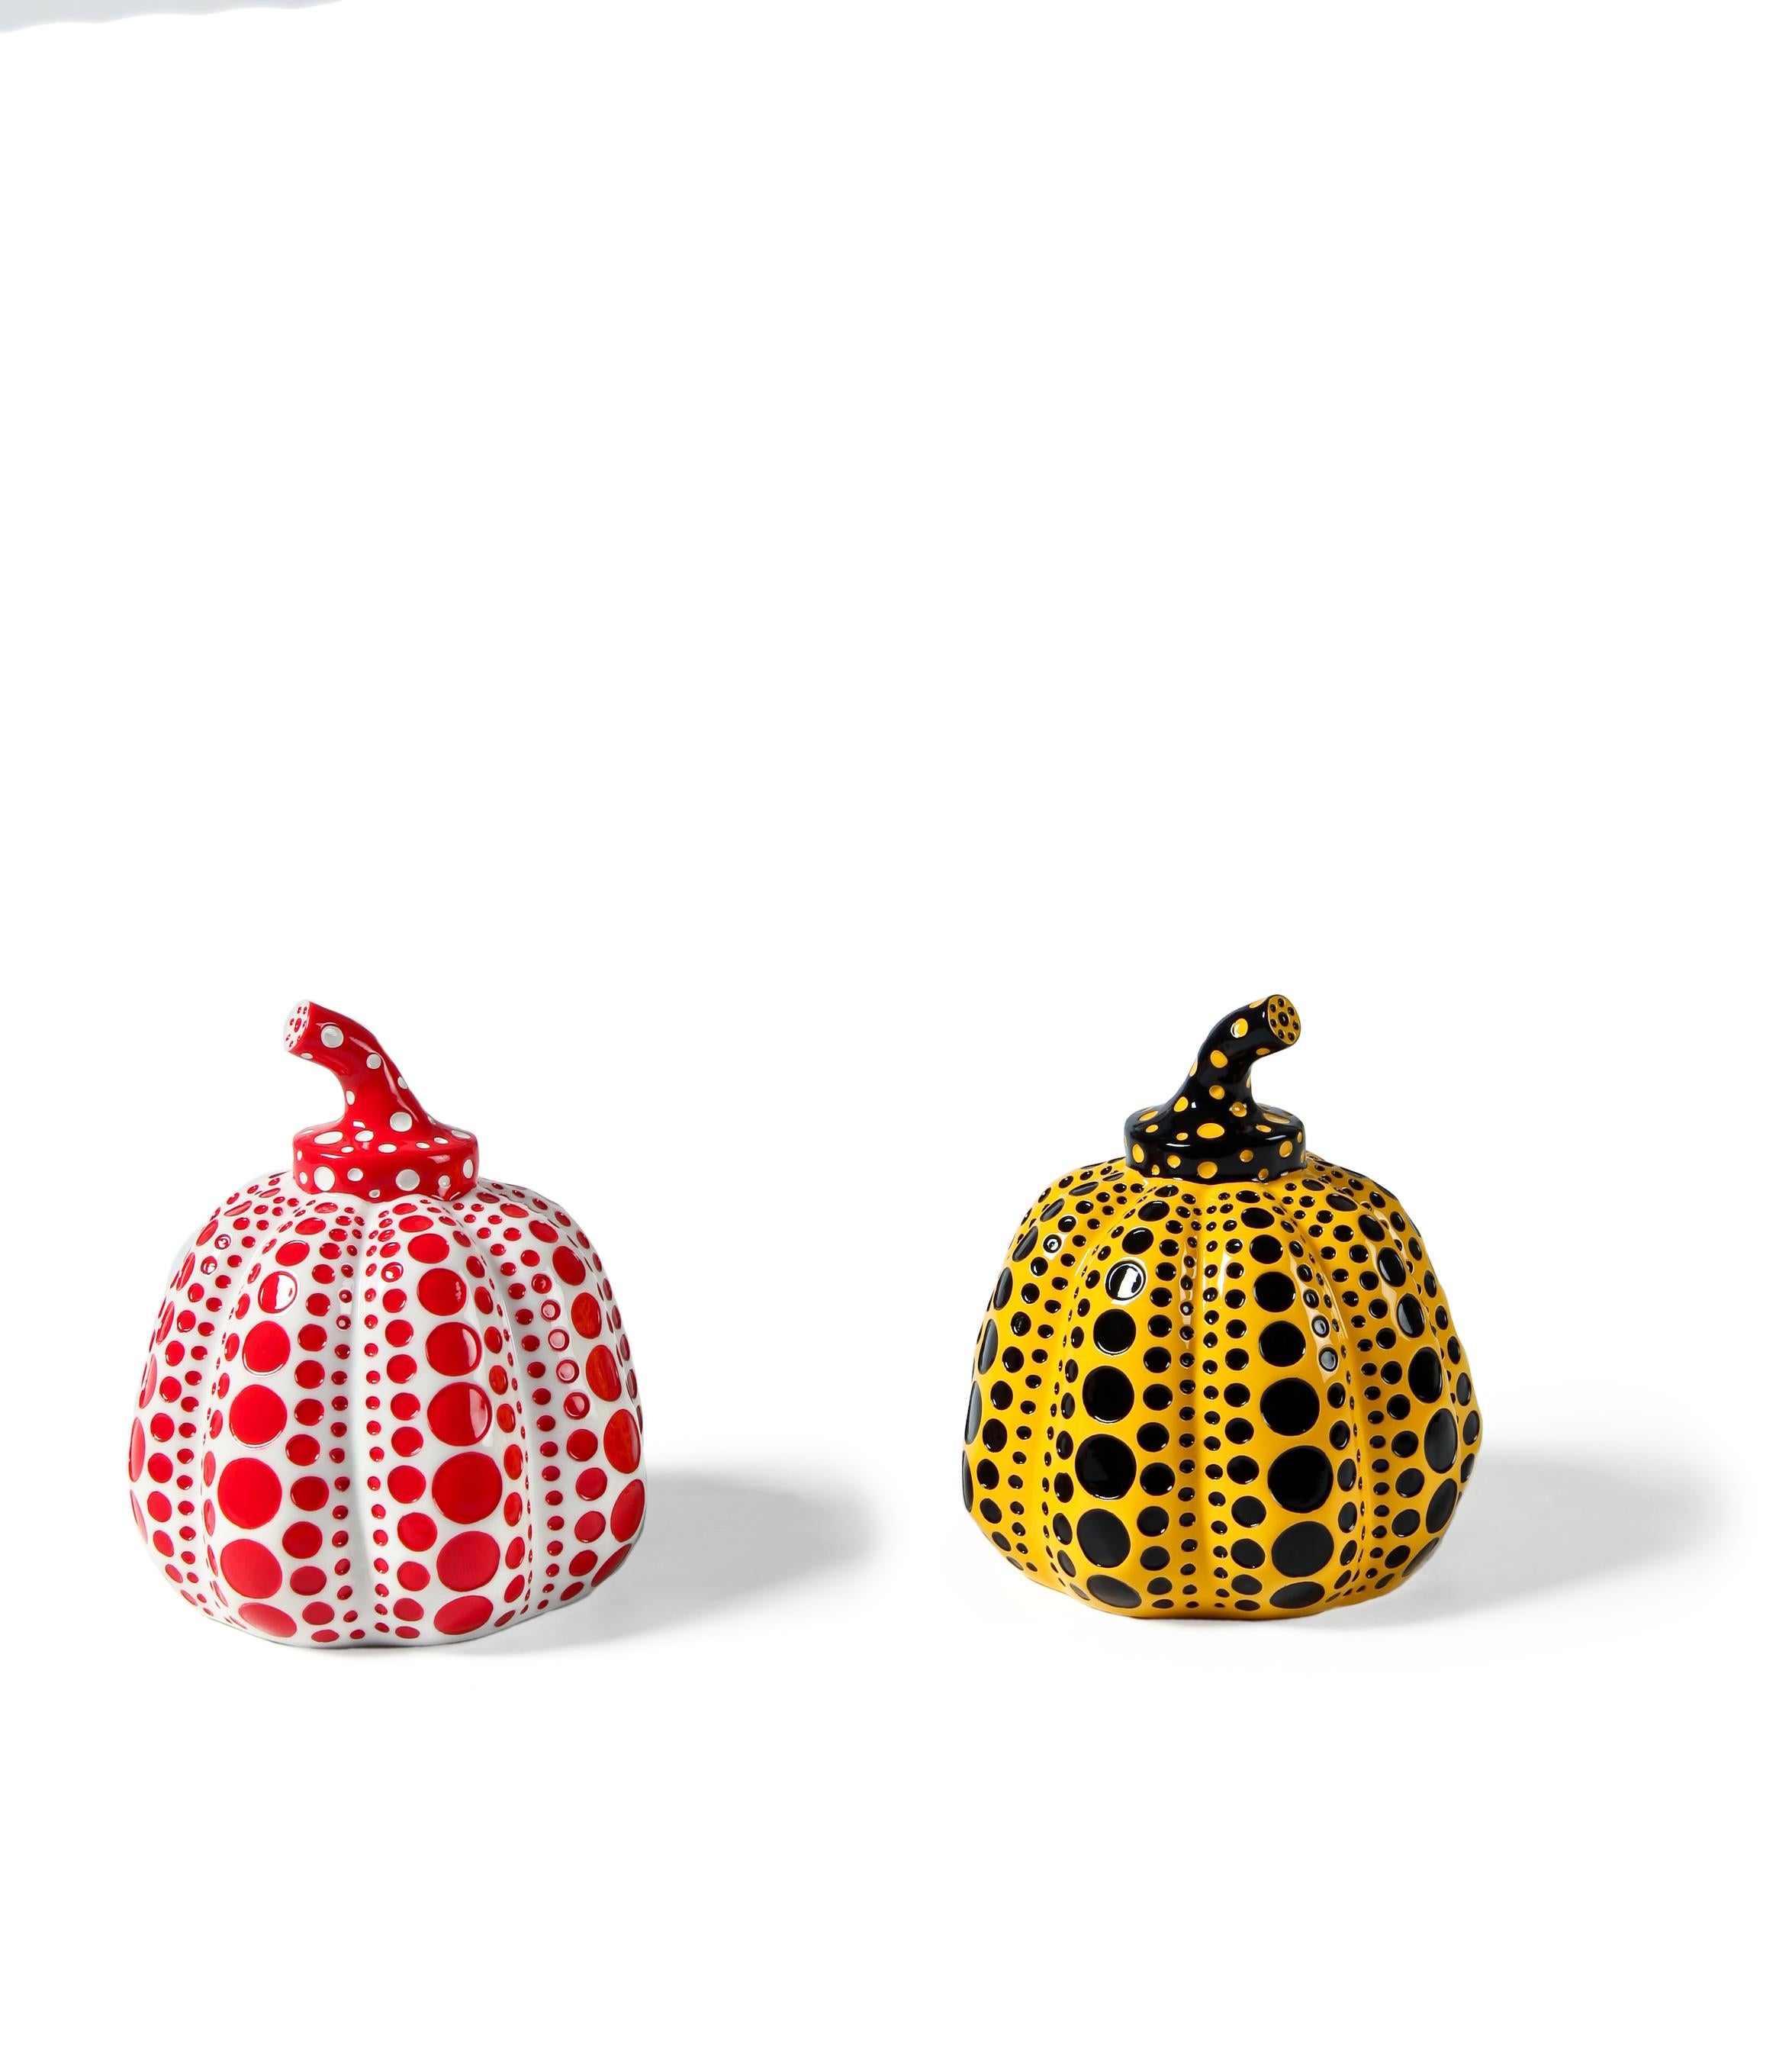 Pumpkin Objects (Pair White & Yellow) -- Sculptures, multiples by Yayoi Kusama 1